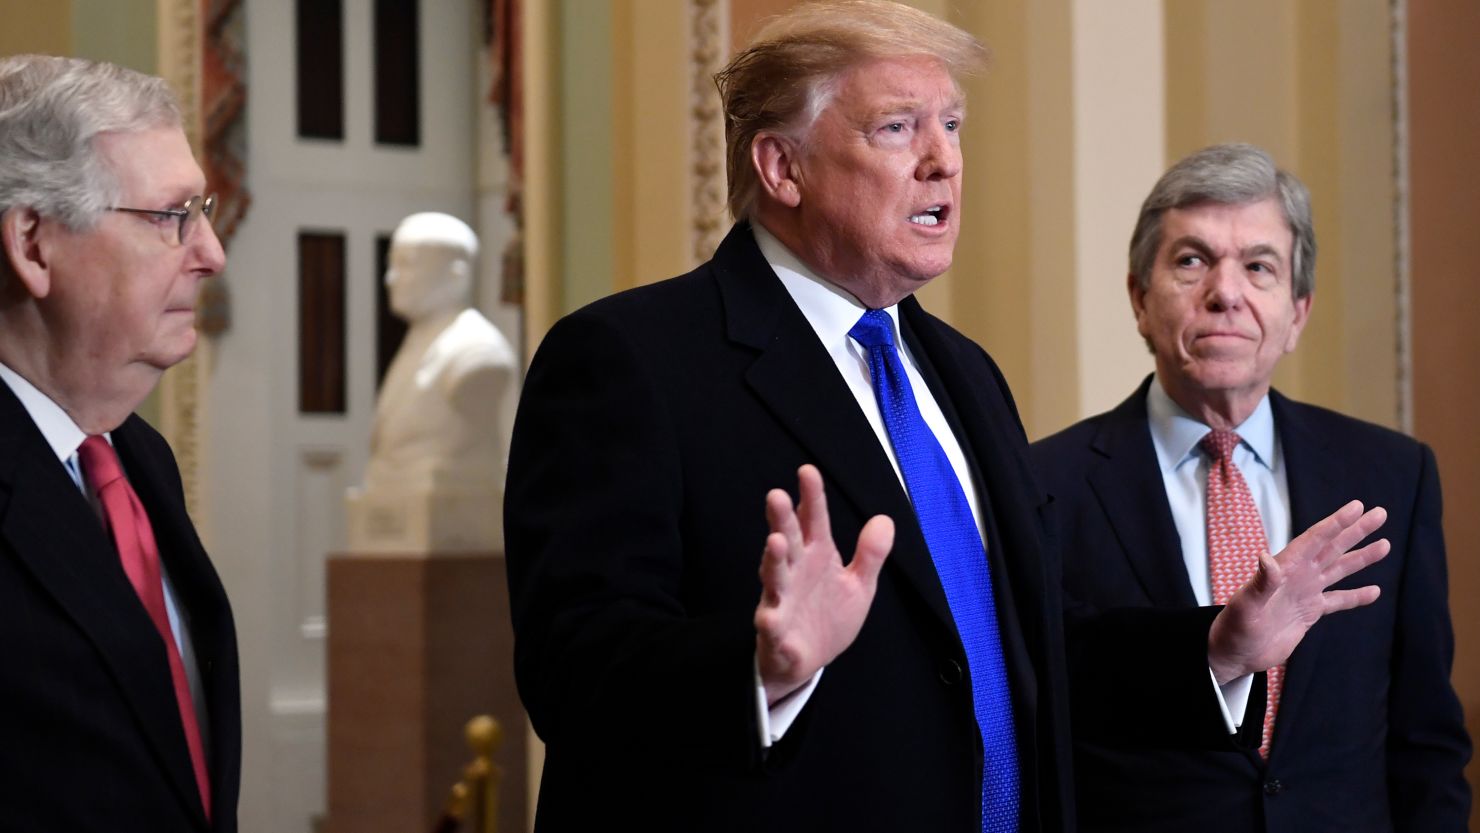 President Donald Trump accompanied by Senate Majority Leader Mitch McConnell of Ky., left, and Sen. Roy Blunt, R-Mo., right, speaks to members of the media as he arrives for a Senate Republican policy lunch on Capitol Hill in Washington, Tuesday, March 26, 2019. (AP Photo/Susan Walsh)